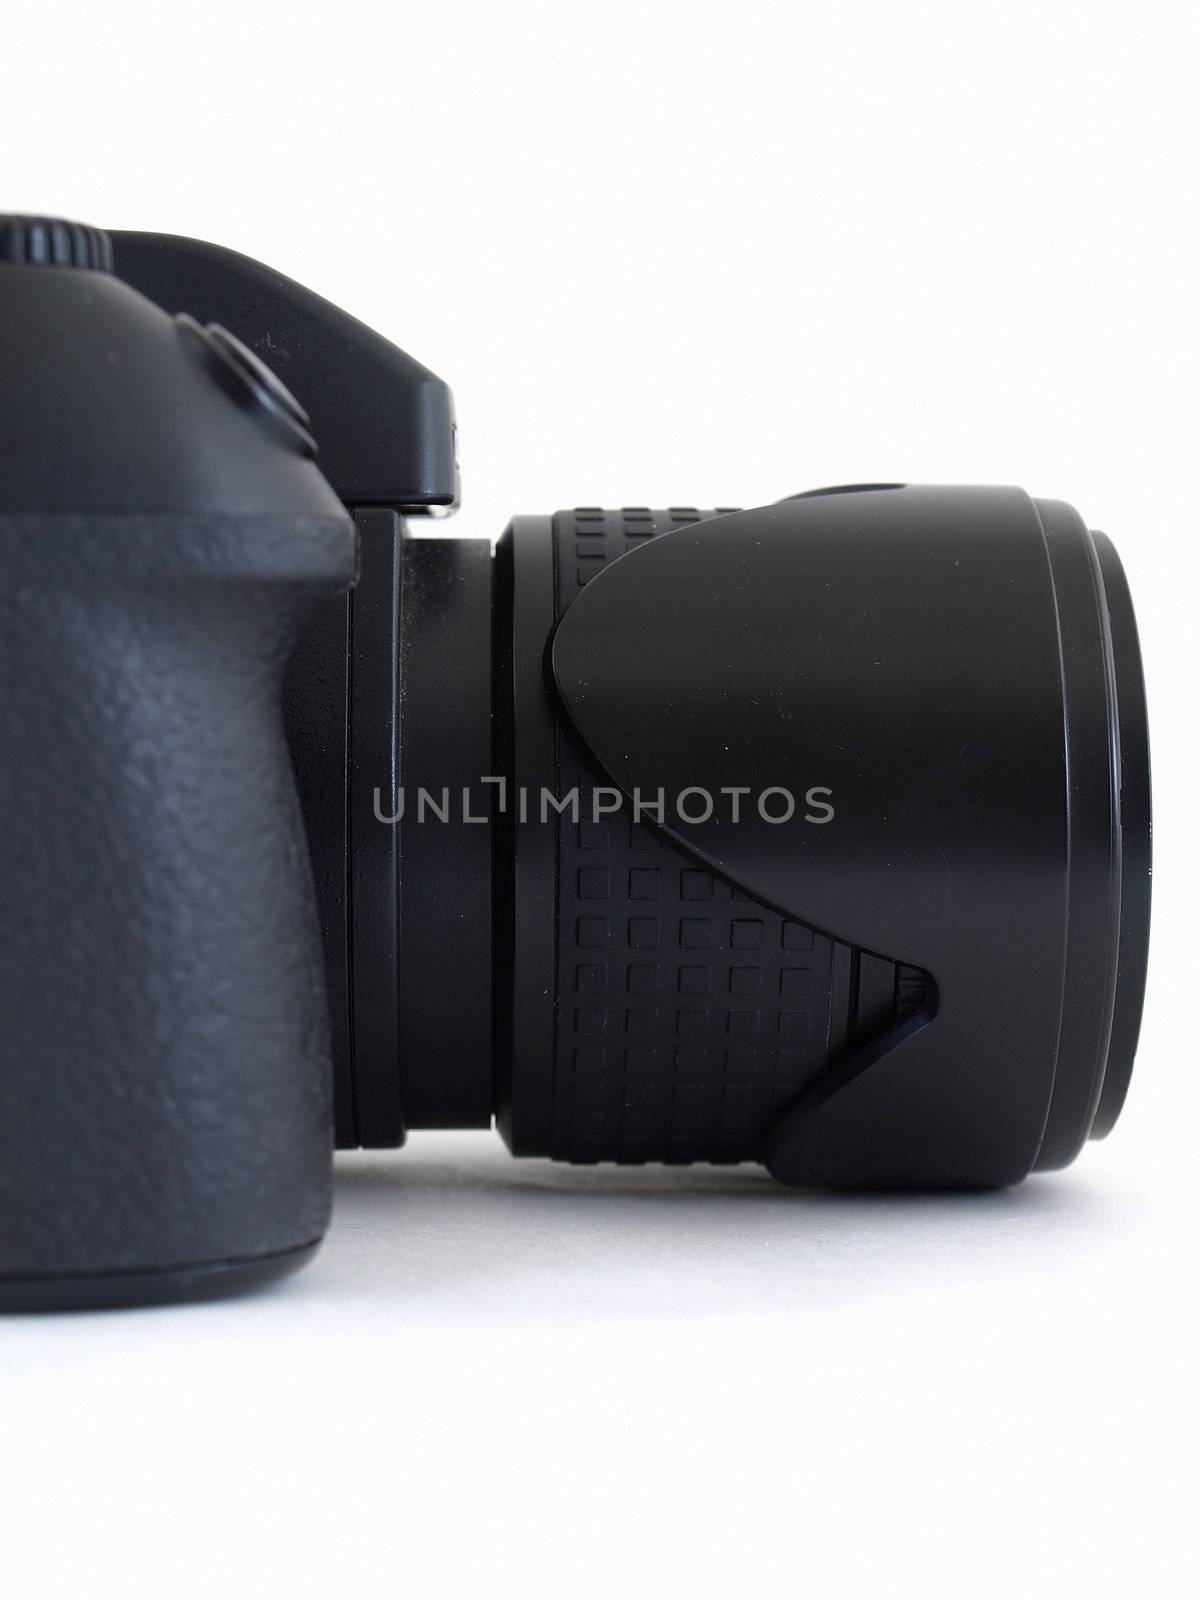 A black digital camera body with an attached lens. Studio isolated over white.